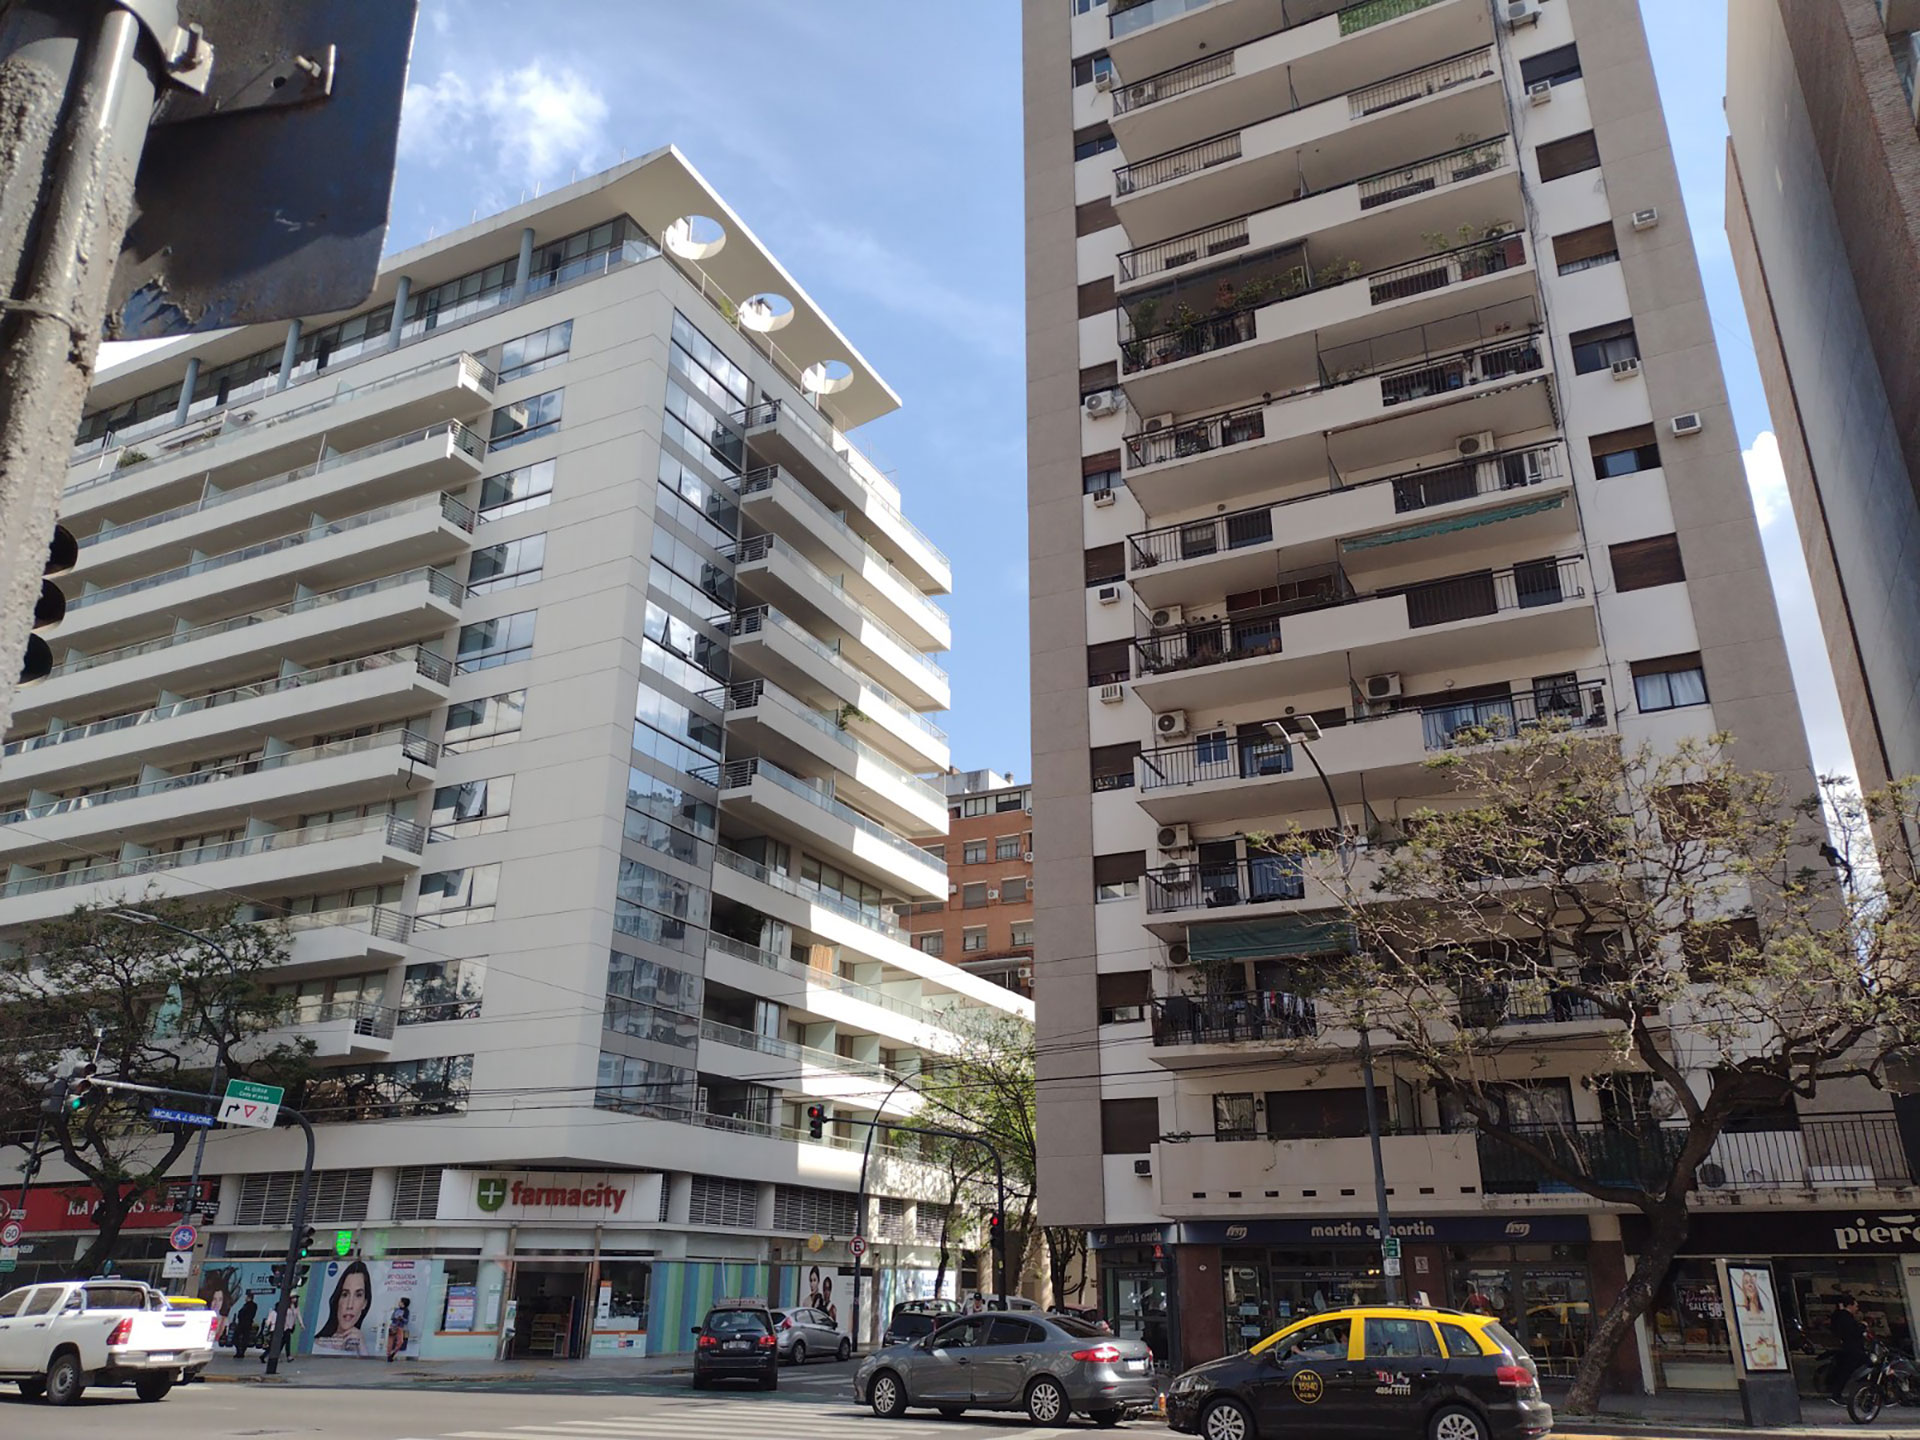 Avenida del Libertador and Sucre, a highly sought-after area with unit prices starting at USD 3,000 per m2